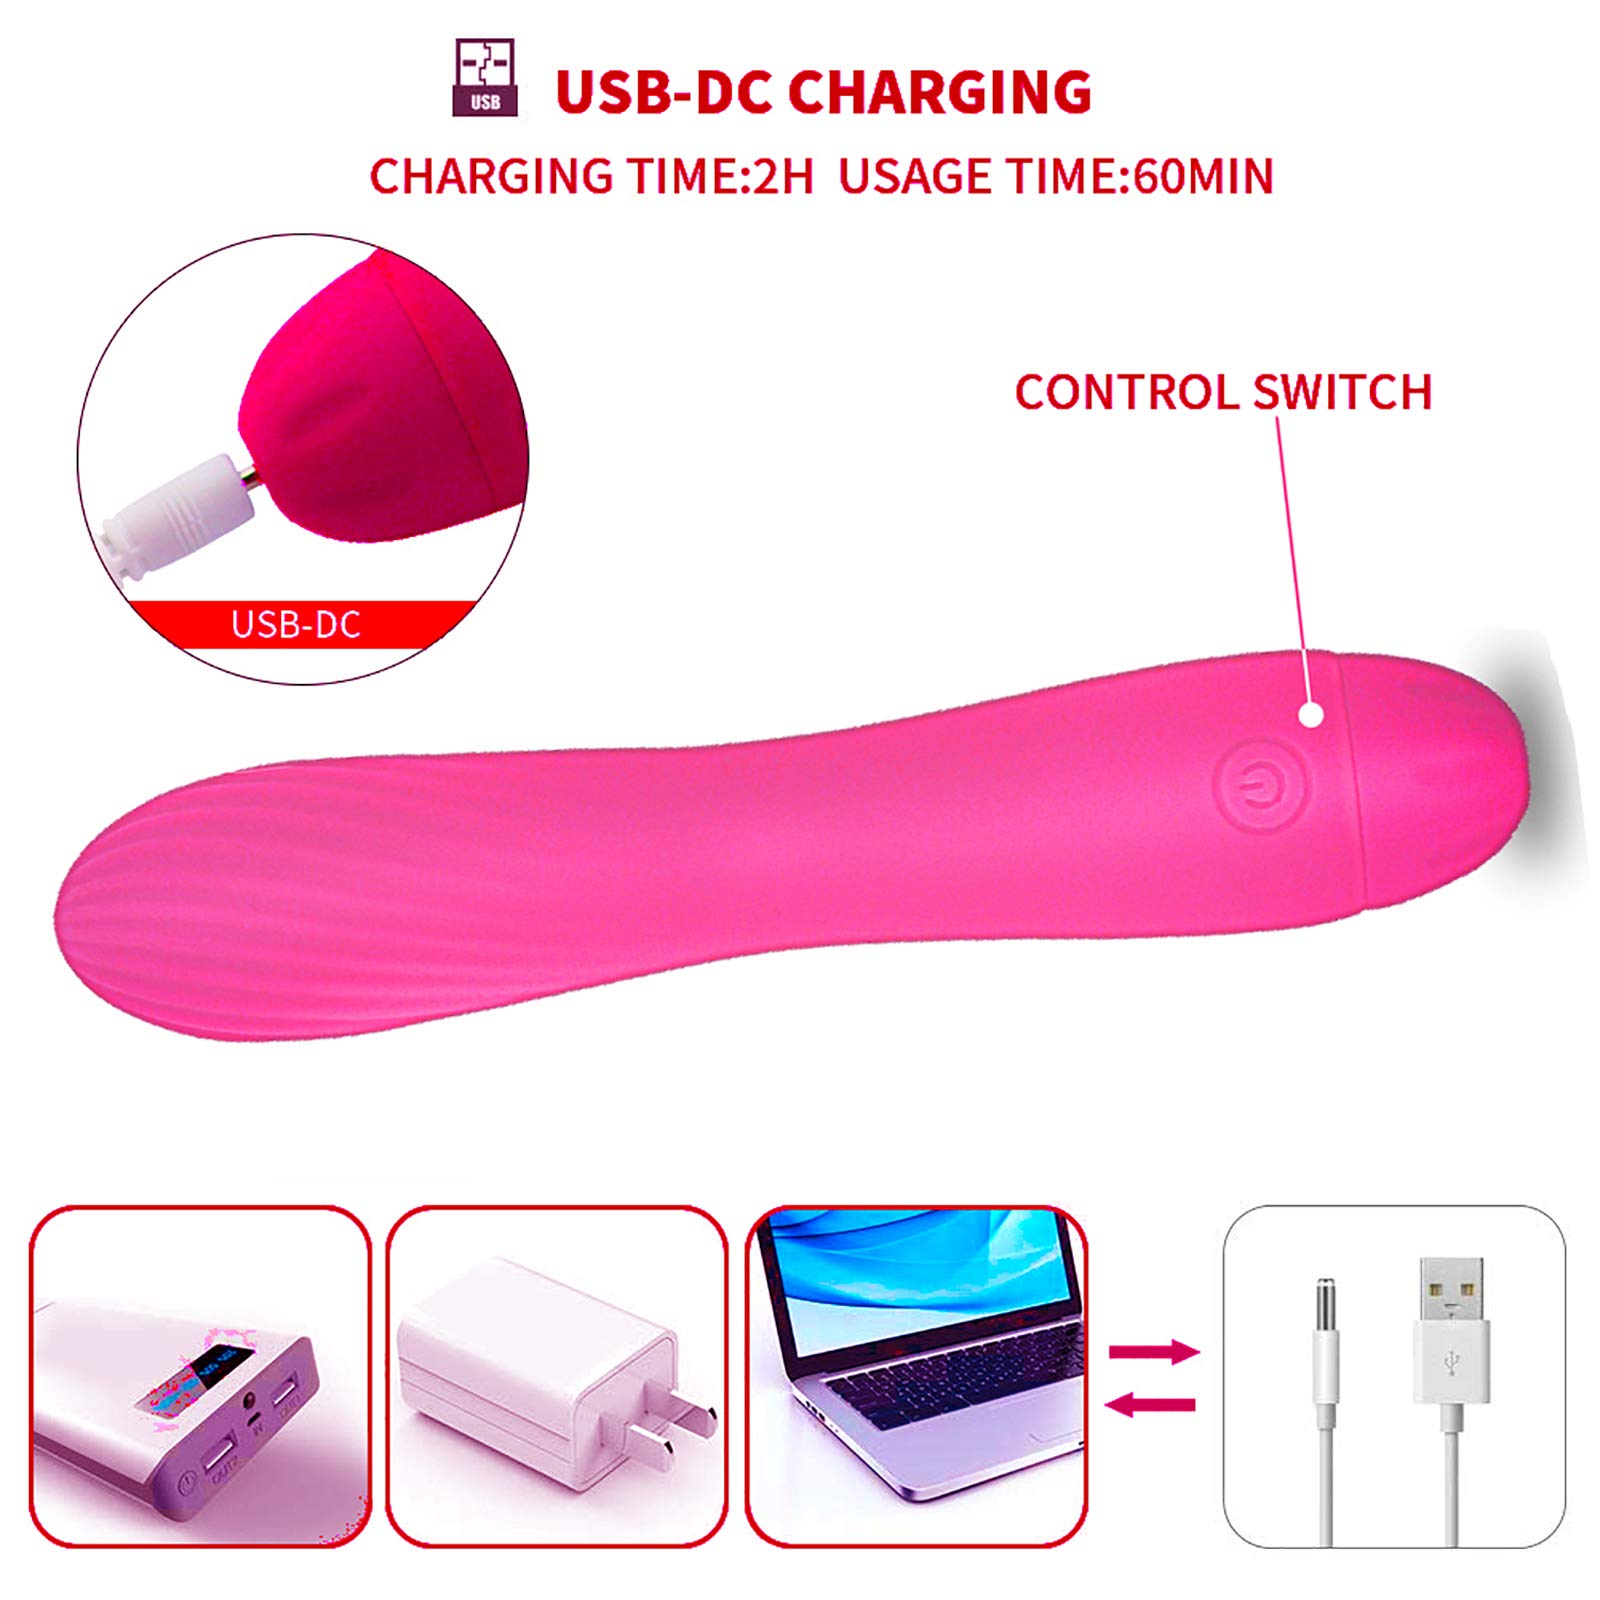 Pleasure Adult Toys Women Sexual - Rabbit Most Pleasure Machine Woman Cheap Men Toy Wedding Gifts Soft Sensory Accessories for Thrusting Machine Tool Wellness Products Female her him fghe02